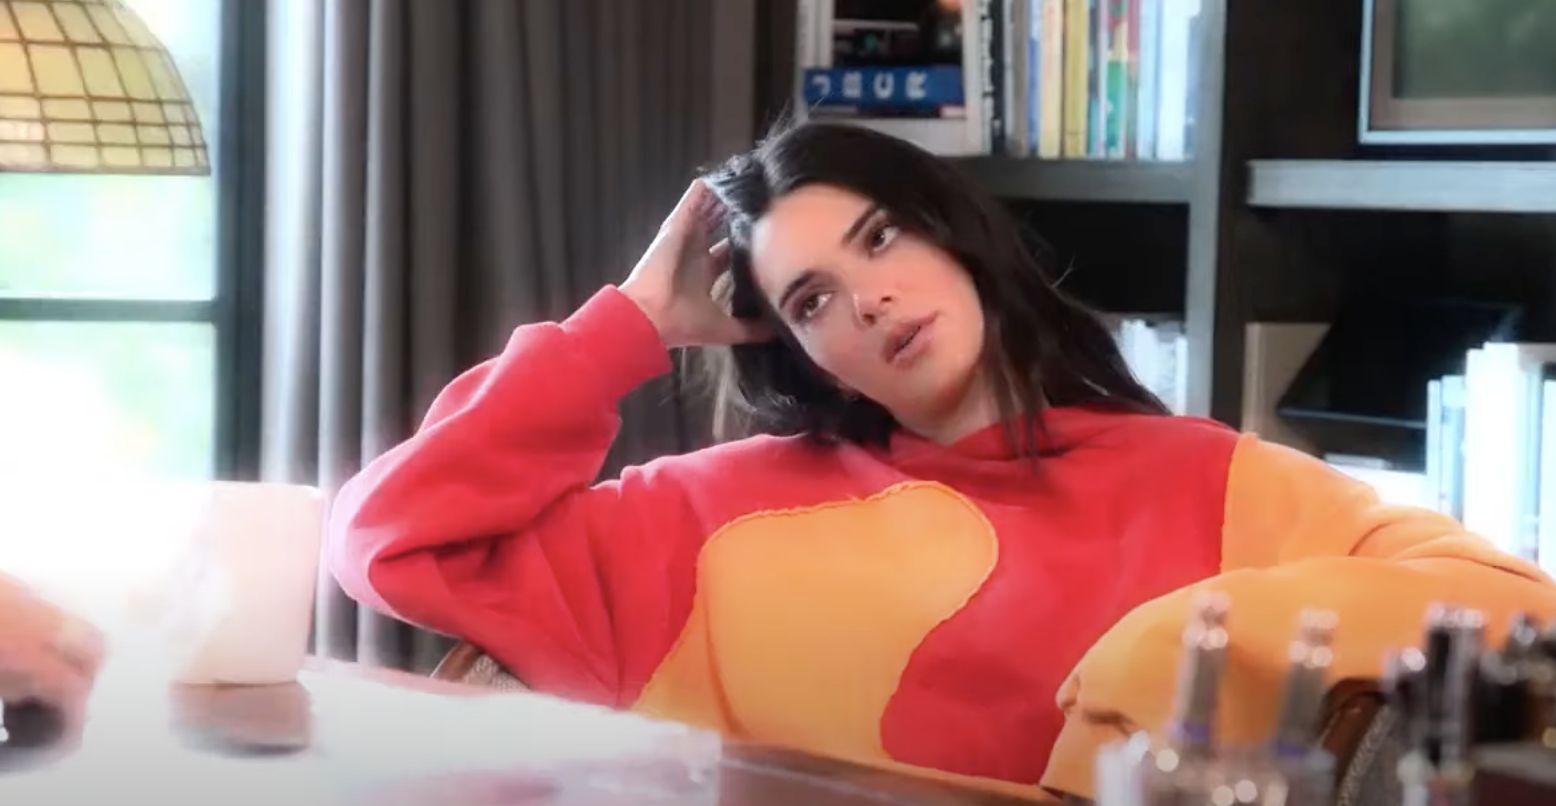 Kendall looking thoughtful and touching her hair